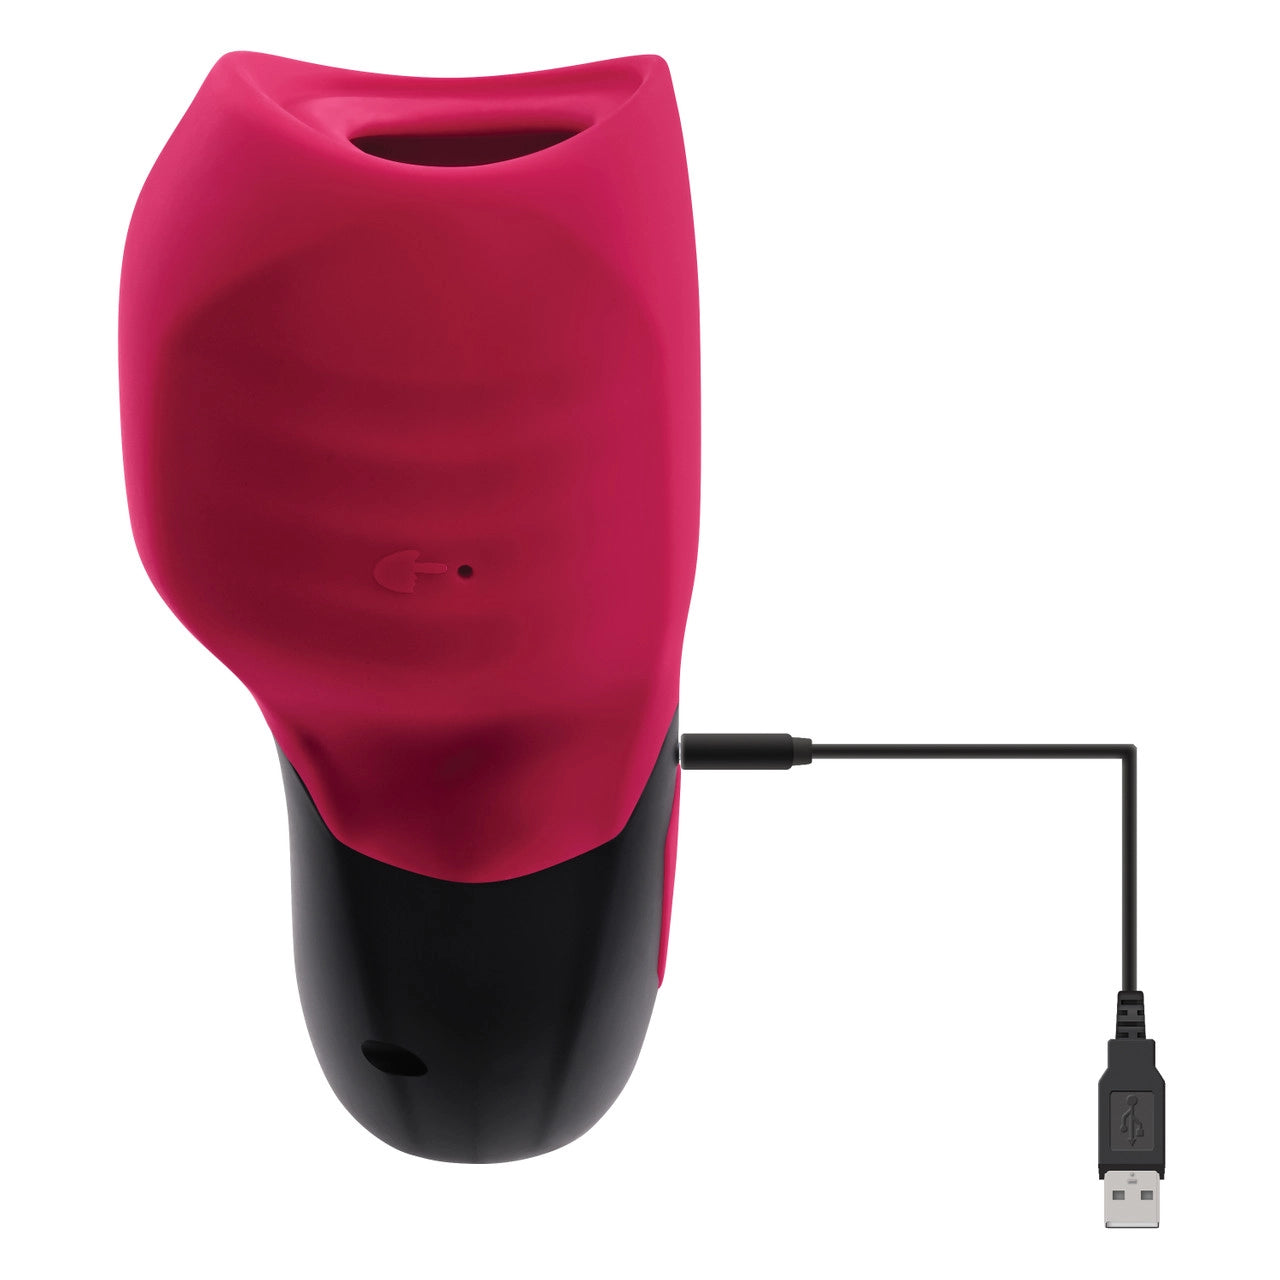 The Body Kisses Vibrating Suction Massager with its charging cable attached. 